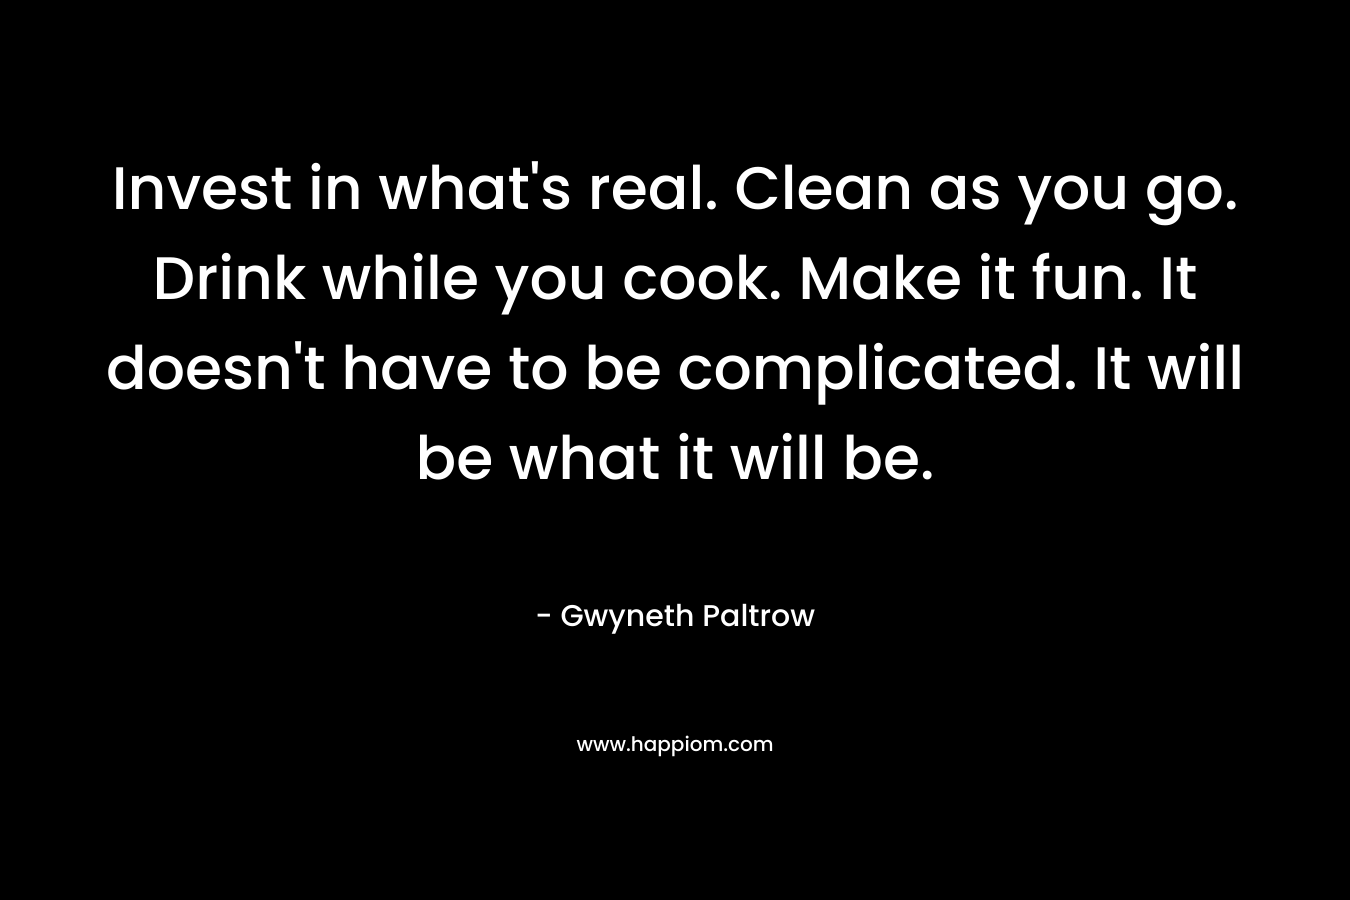 Invest in what’s real. Clean as you go. Drink while you cook. Make it fun. It doesn’t have to be complicated. It will be what it will be. – Gwyneth Paltrow